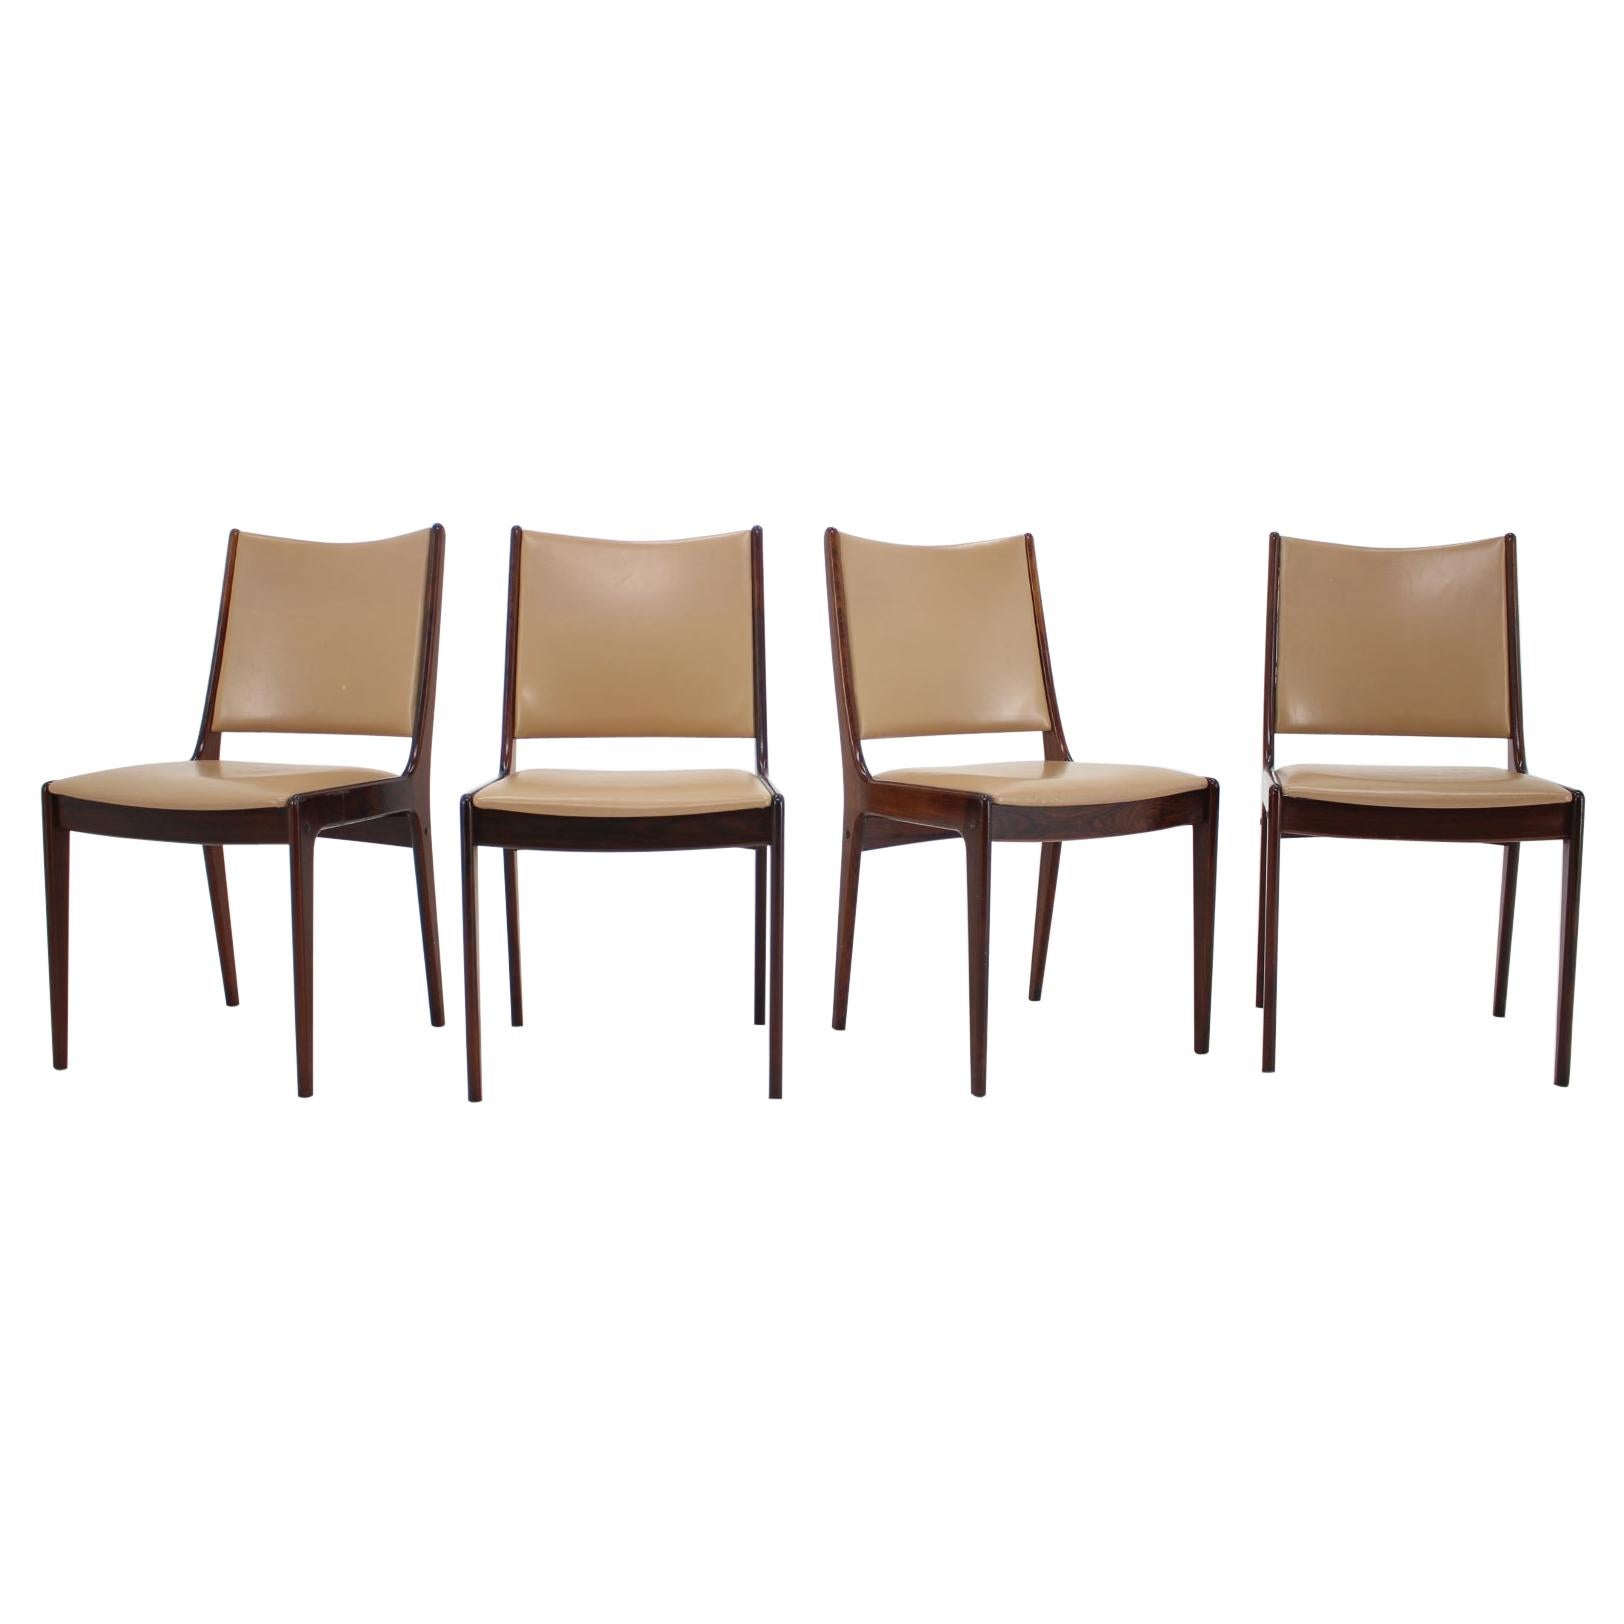 1960s Johannes Andersen Teak Dining Chairs in Leatherette, Set of 4